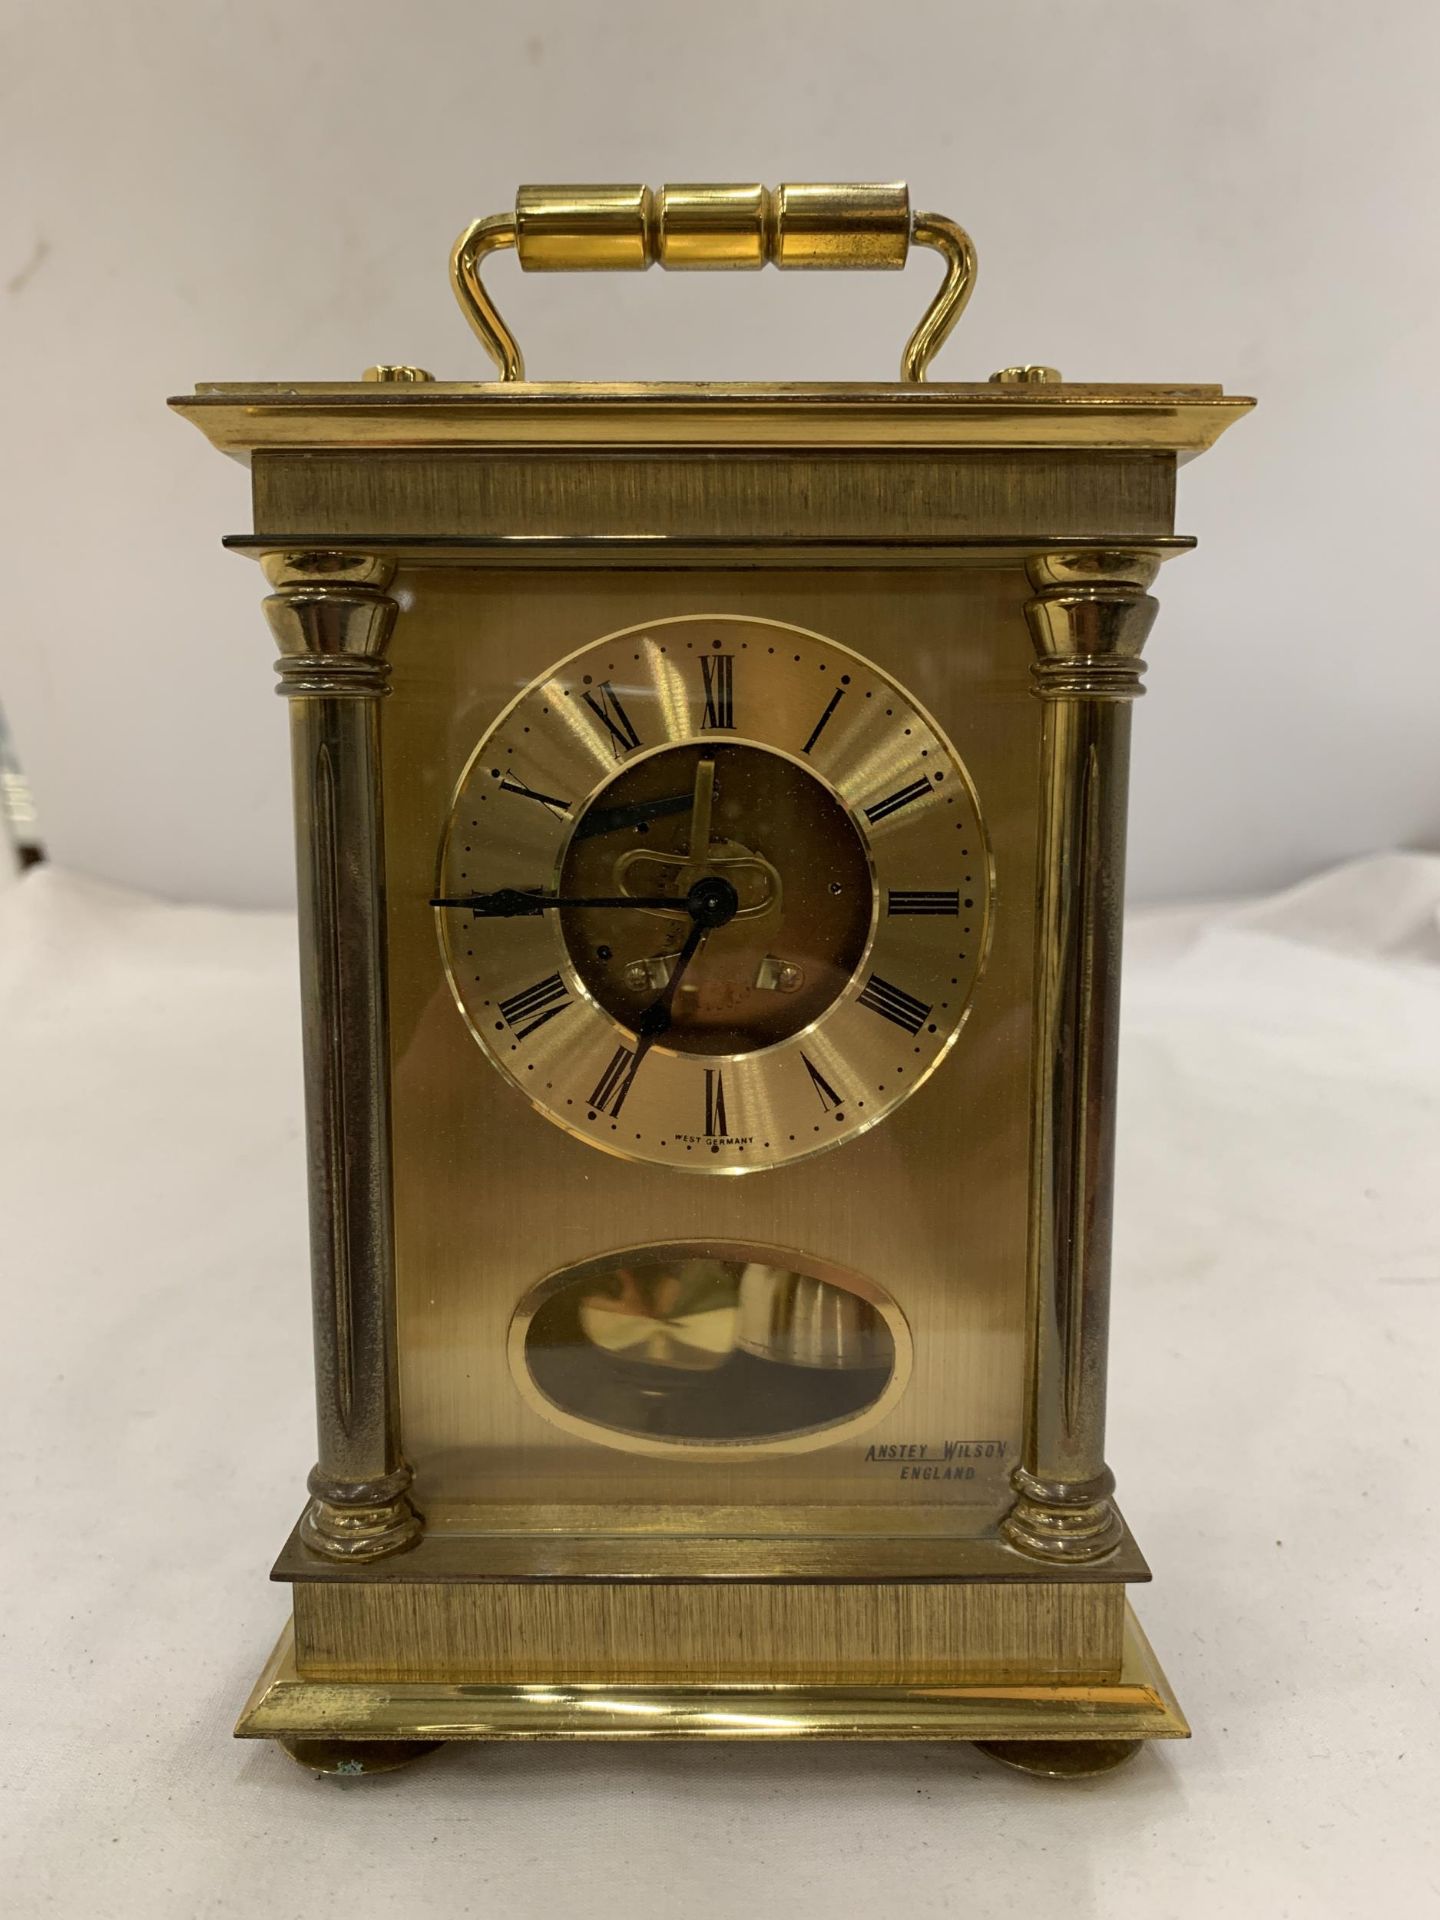 AN 'ANSTEY WILSON' MECHANICAL CARRIAGE CLOCK, WITH PRESENTATION PLAQUE TO THE BACK